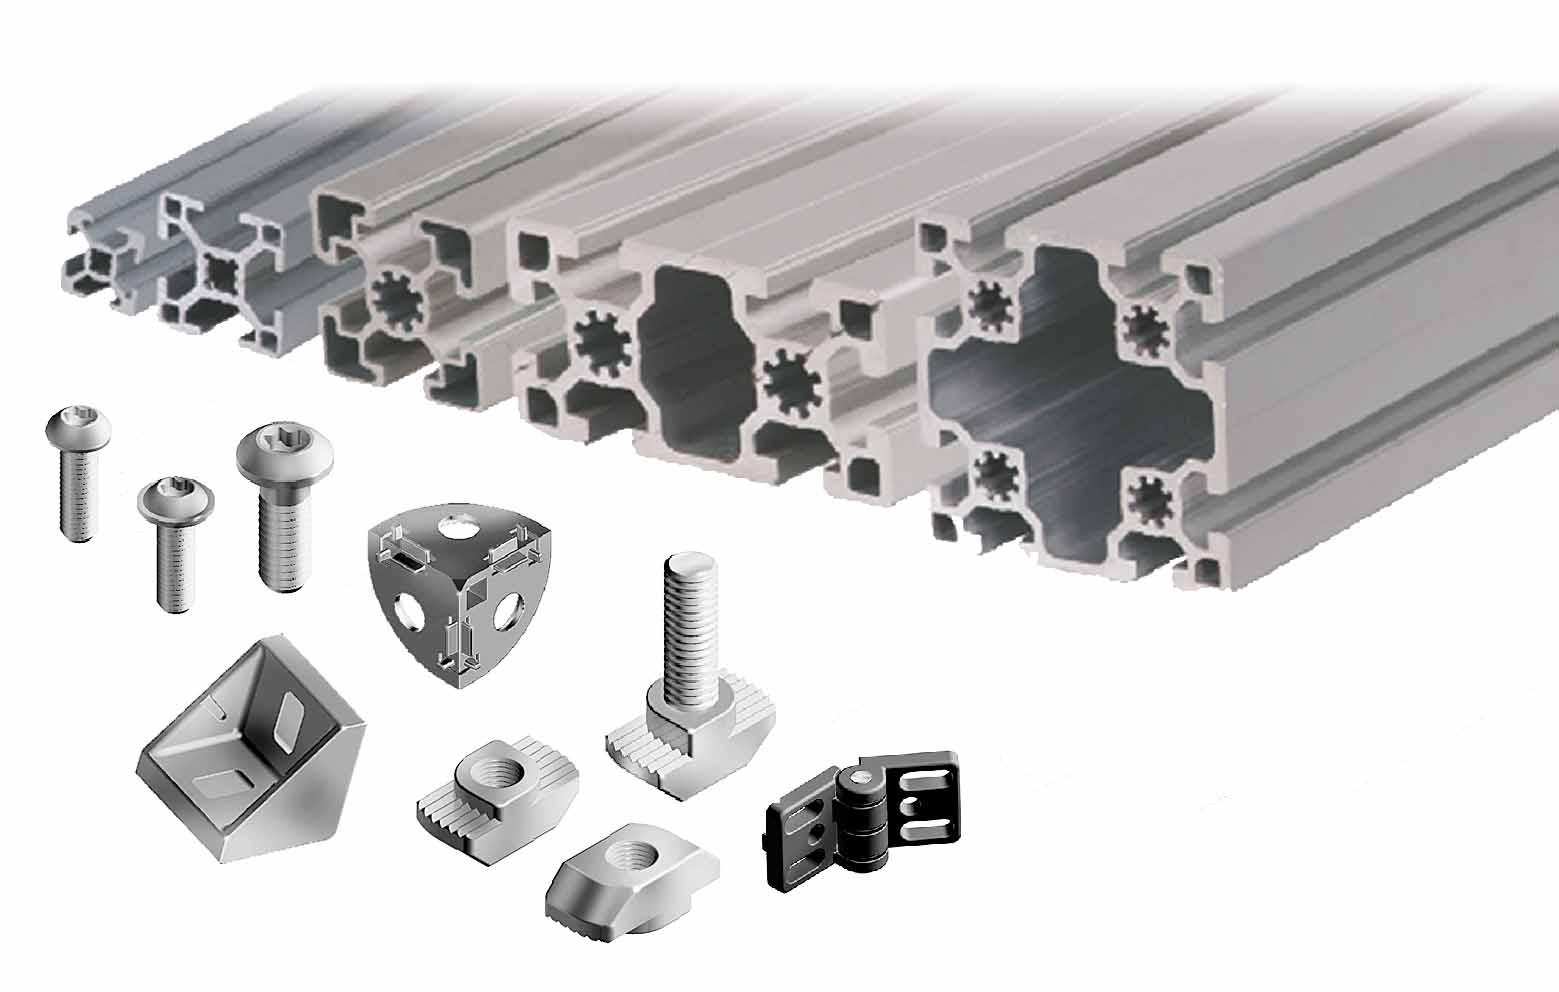 The differences, advantages and disadvantages between extruded aluminum profiles and die-cast aluminum alloy products